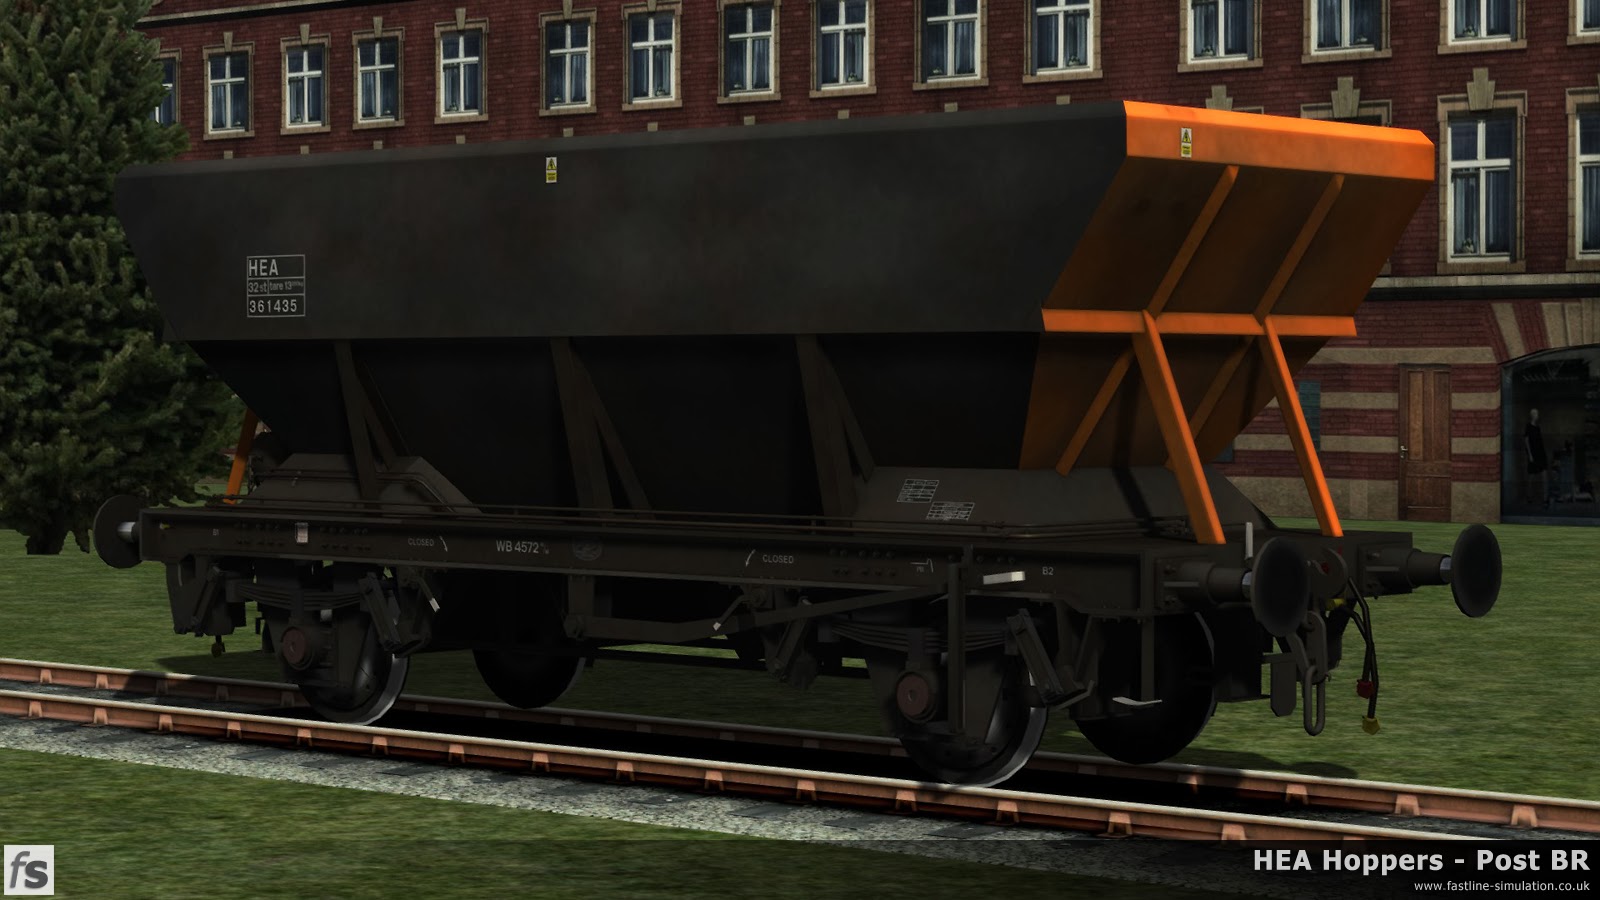 HEA Hoppers - Post BR: Given the scarcity of available photographs this could be a bit of a what if! One of the Loadhaul liveried HEA Hoppers for Train Simulator 2014 is seen after a while in traffic. The overhead warning stickers have been replaced with modern yellow and black ones and the end ladders removed.